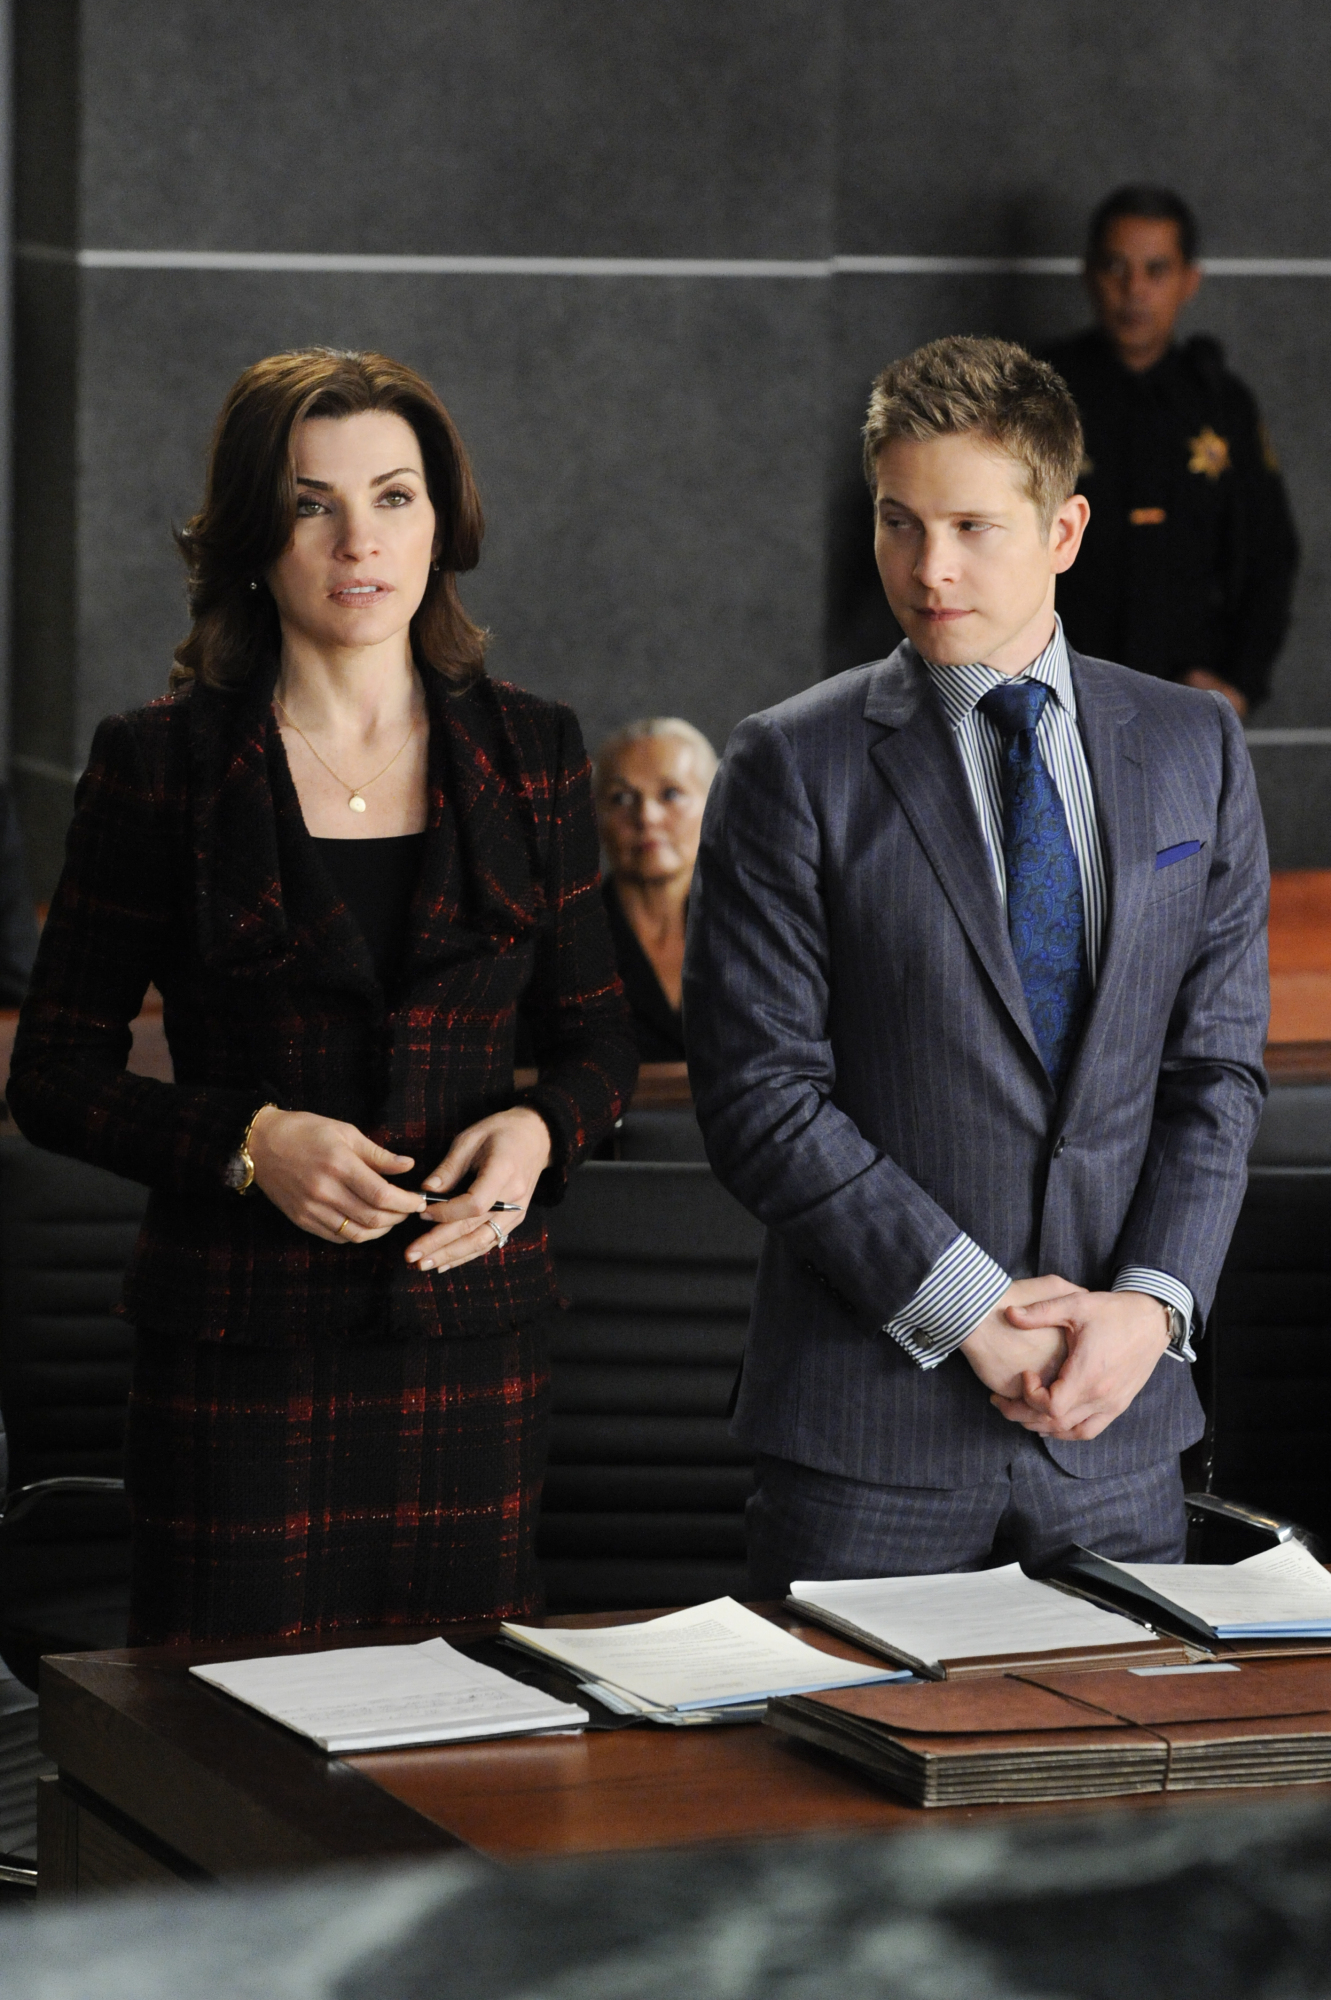 9. Going Up Against Will Gardner Calls For A Special Type Of Suit